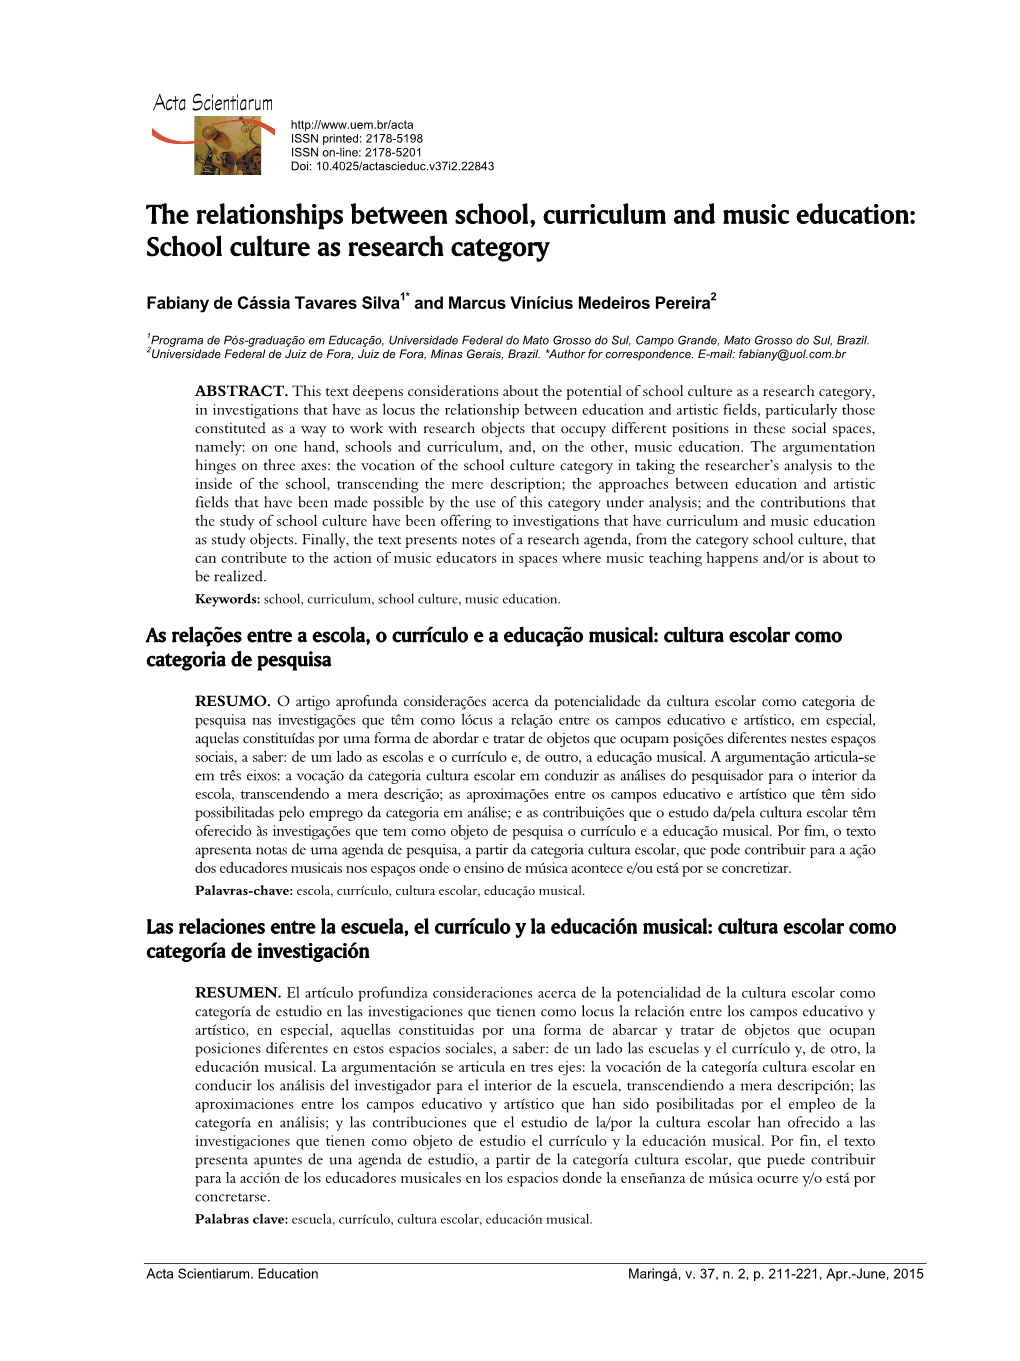 The Relationships Between School, Curriculum and Music Education: School Culture As Research Category